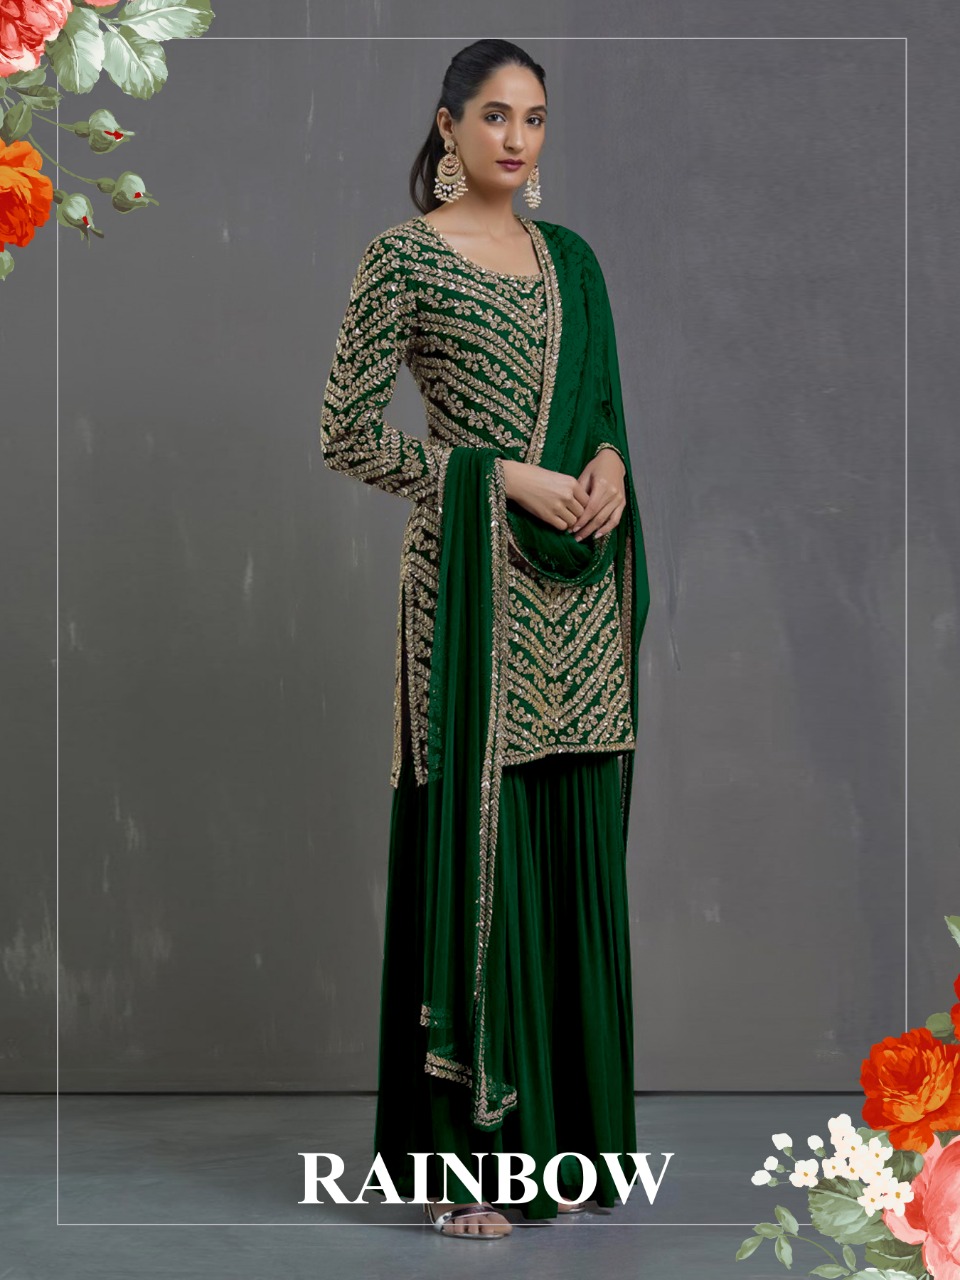 Fepic rainbow elegant and Modern Stylish Georgette  fabric Pakistani collection of Salwar suit